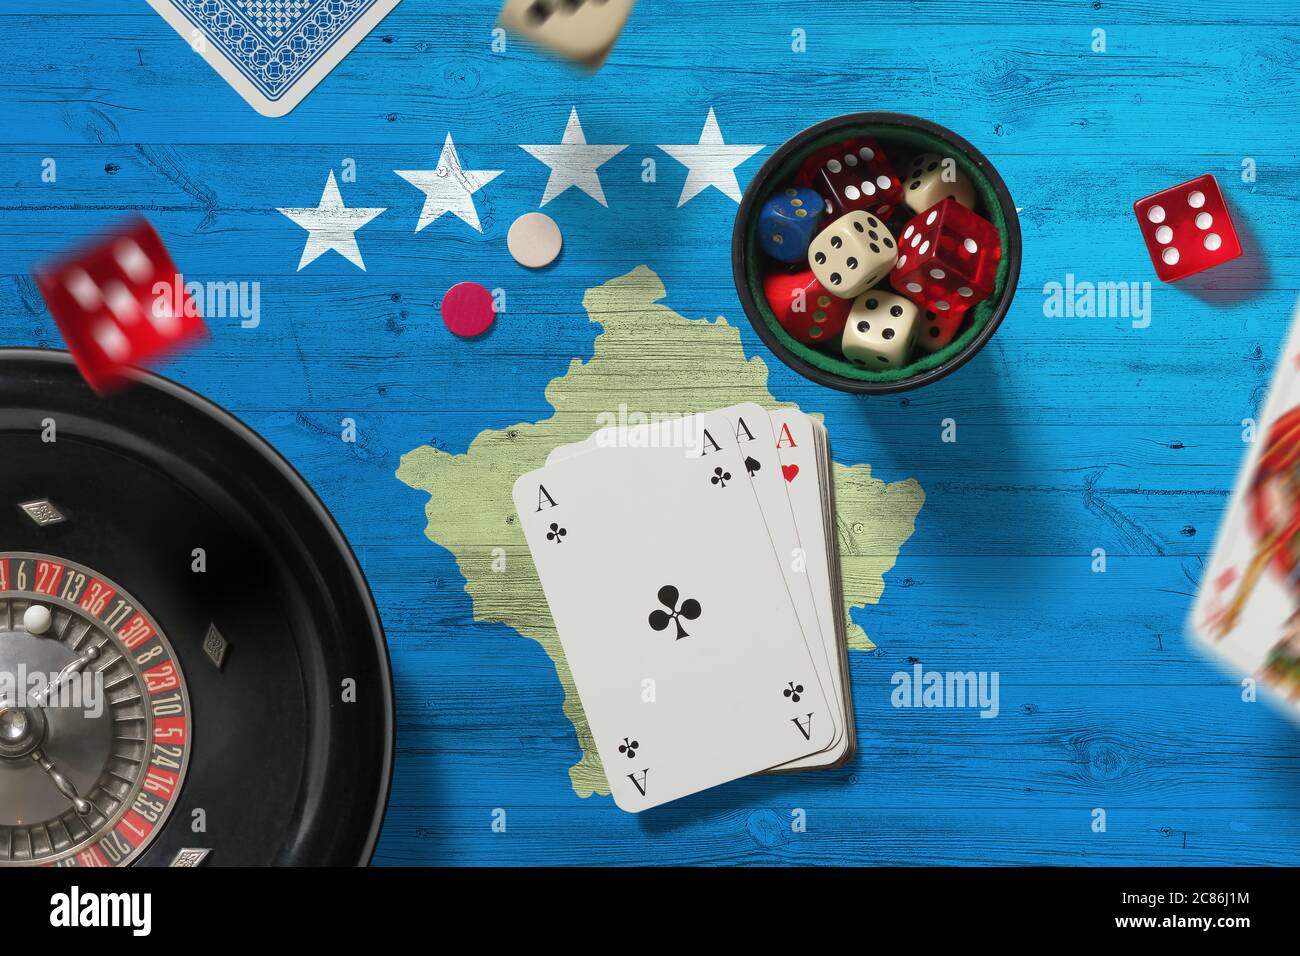 Kosovo casino theme. Aces in poker game, cards and chips on red table with national flag background. Gambling and betting. Stock Photo